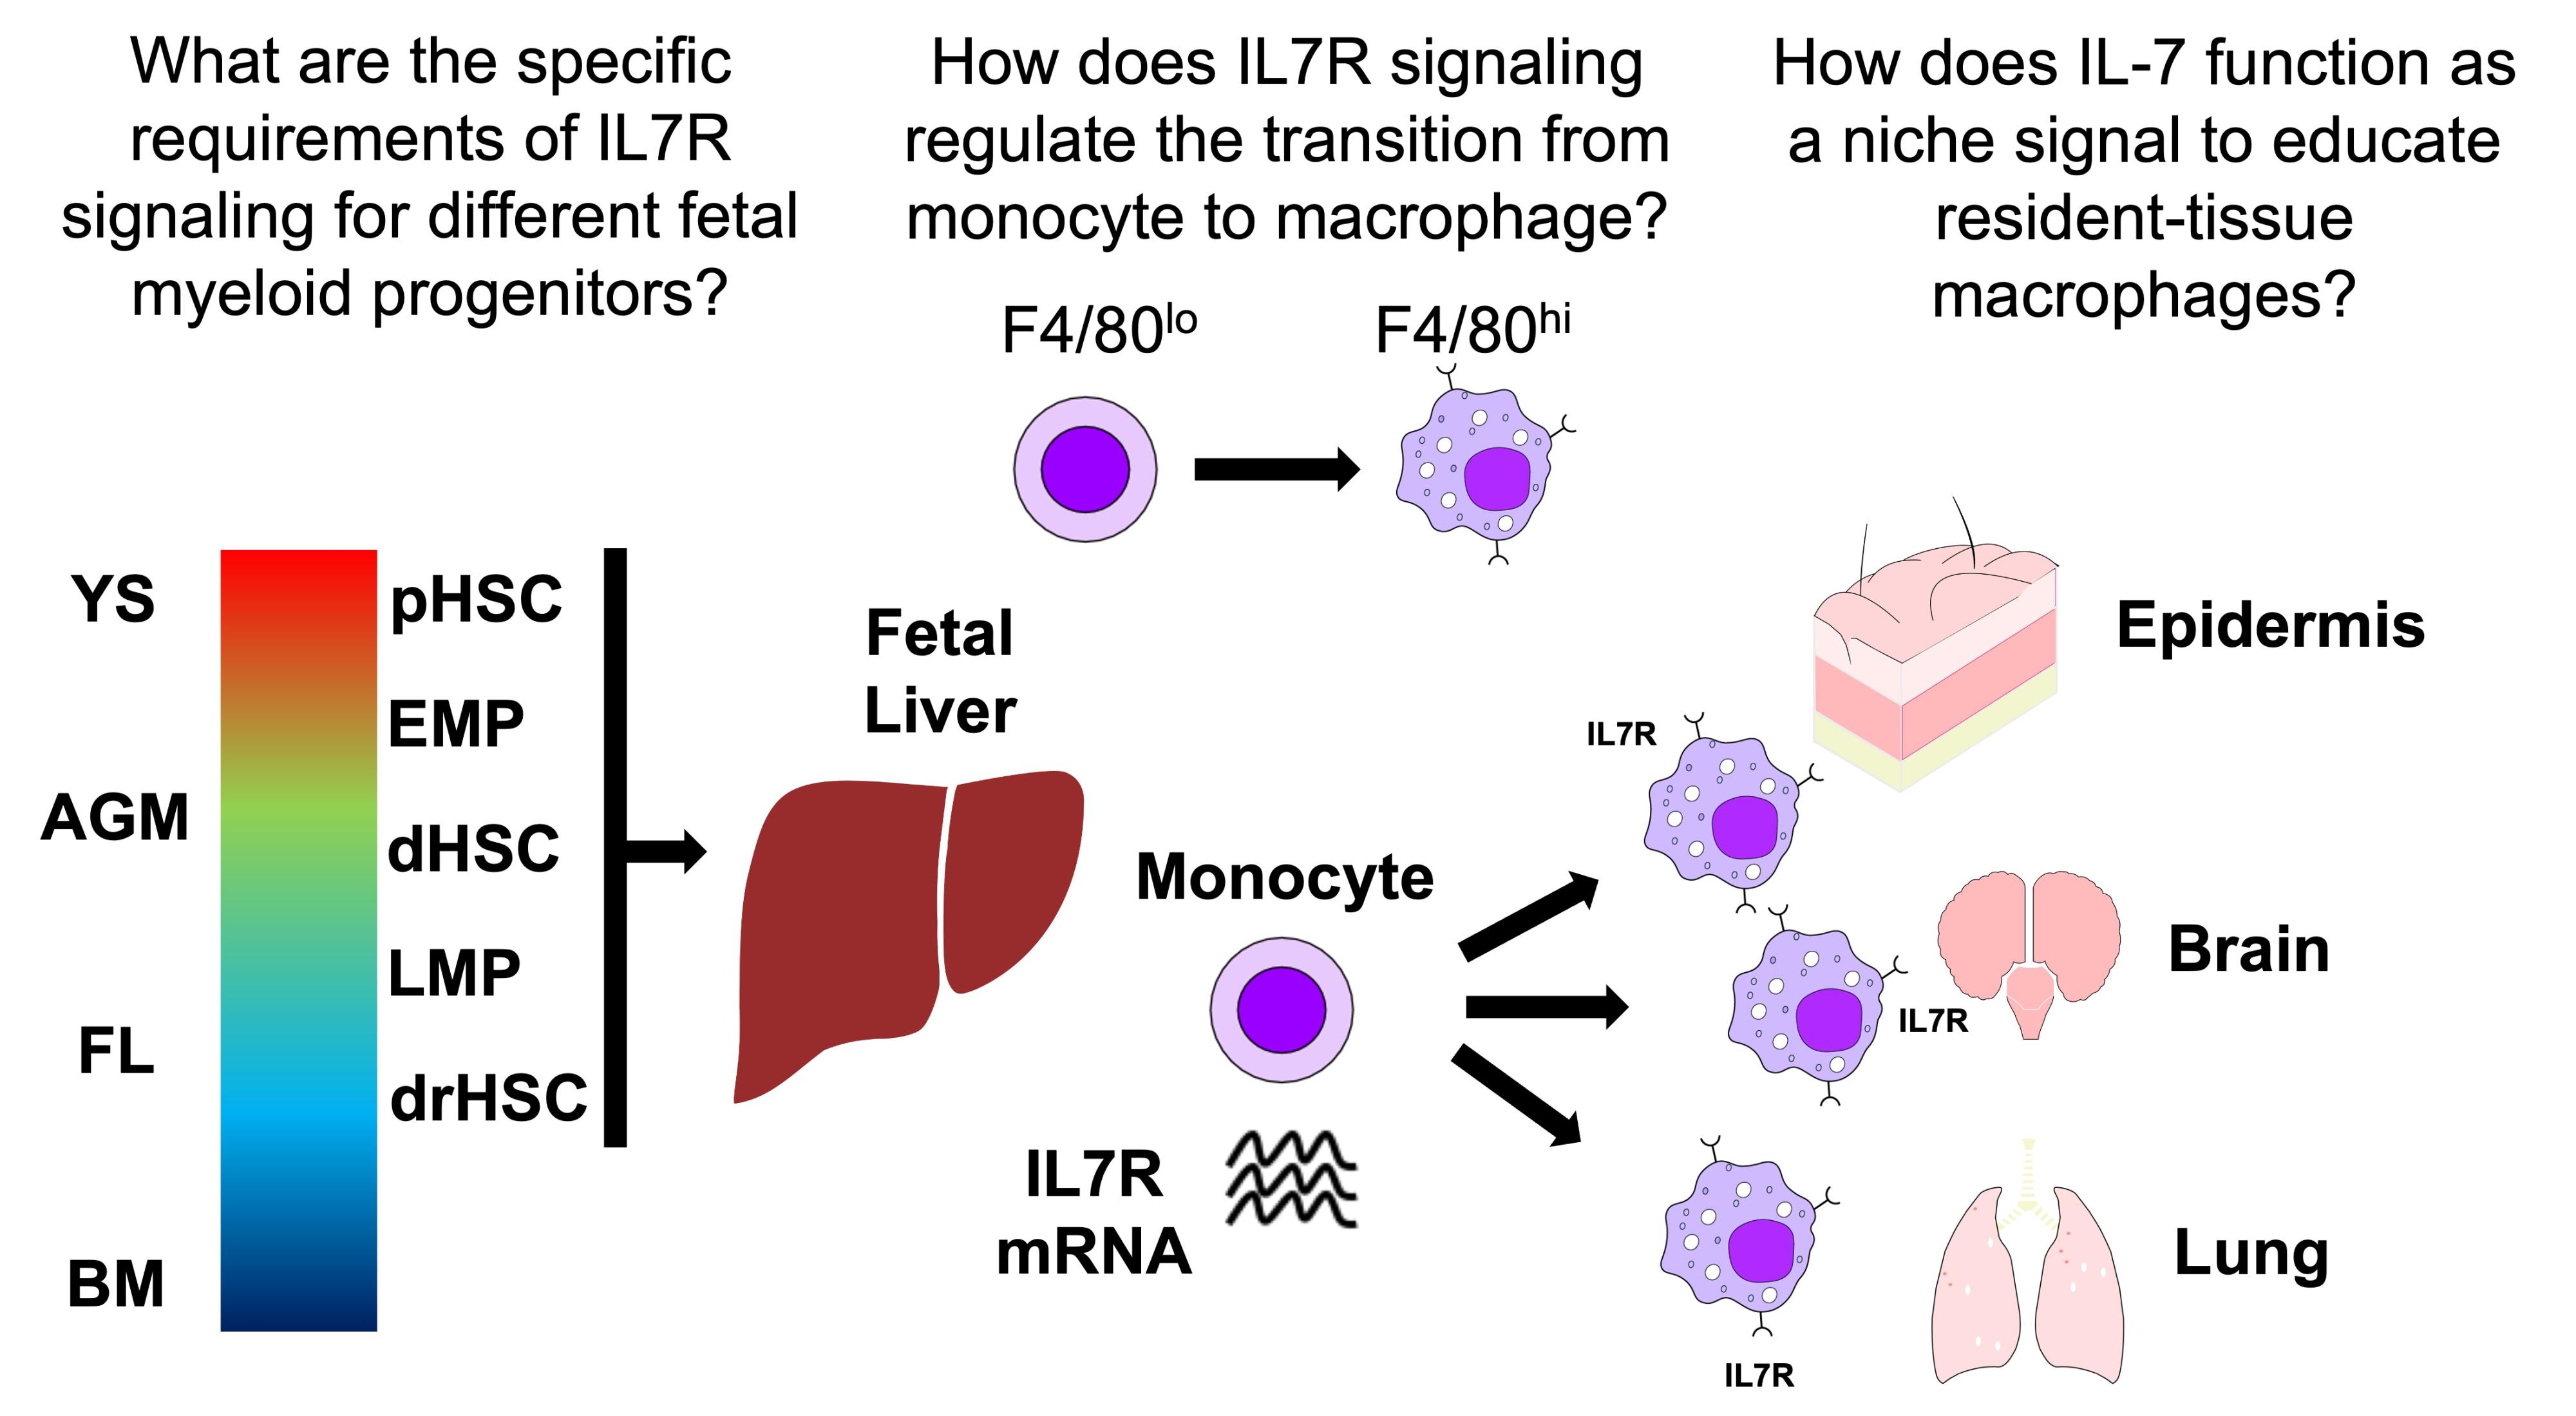 Regulation of tissue resident macrophage development by IL-7R signaling